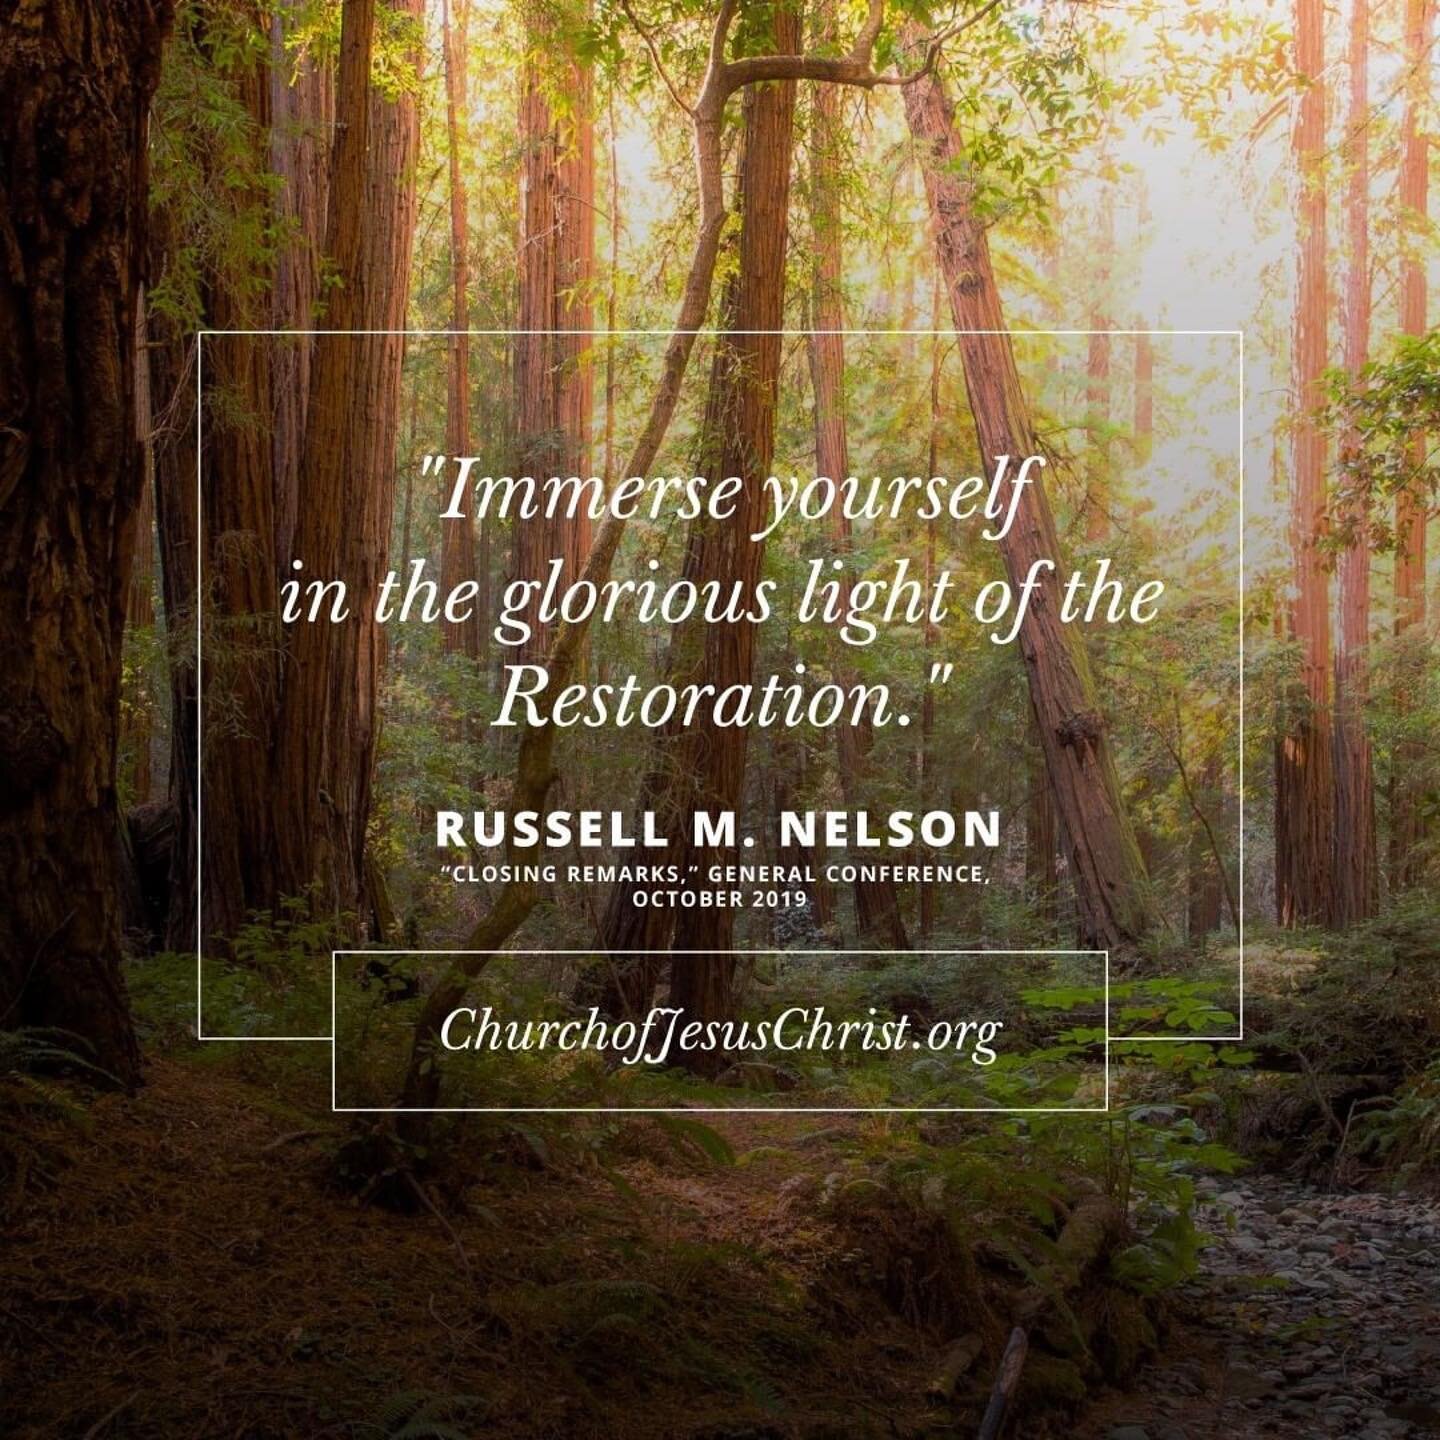 &ldquo;At #GeneralConference in October, President @russellmnelson invited us to study the events of the Restoration of the gospel of Jesus Christ. What have you learned as you&rsquo;ve studied? How have you grown closer to the Savior?&rdquo; @church